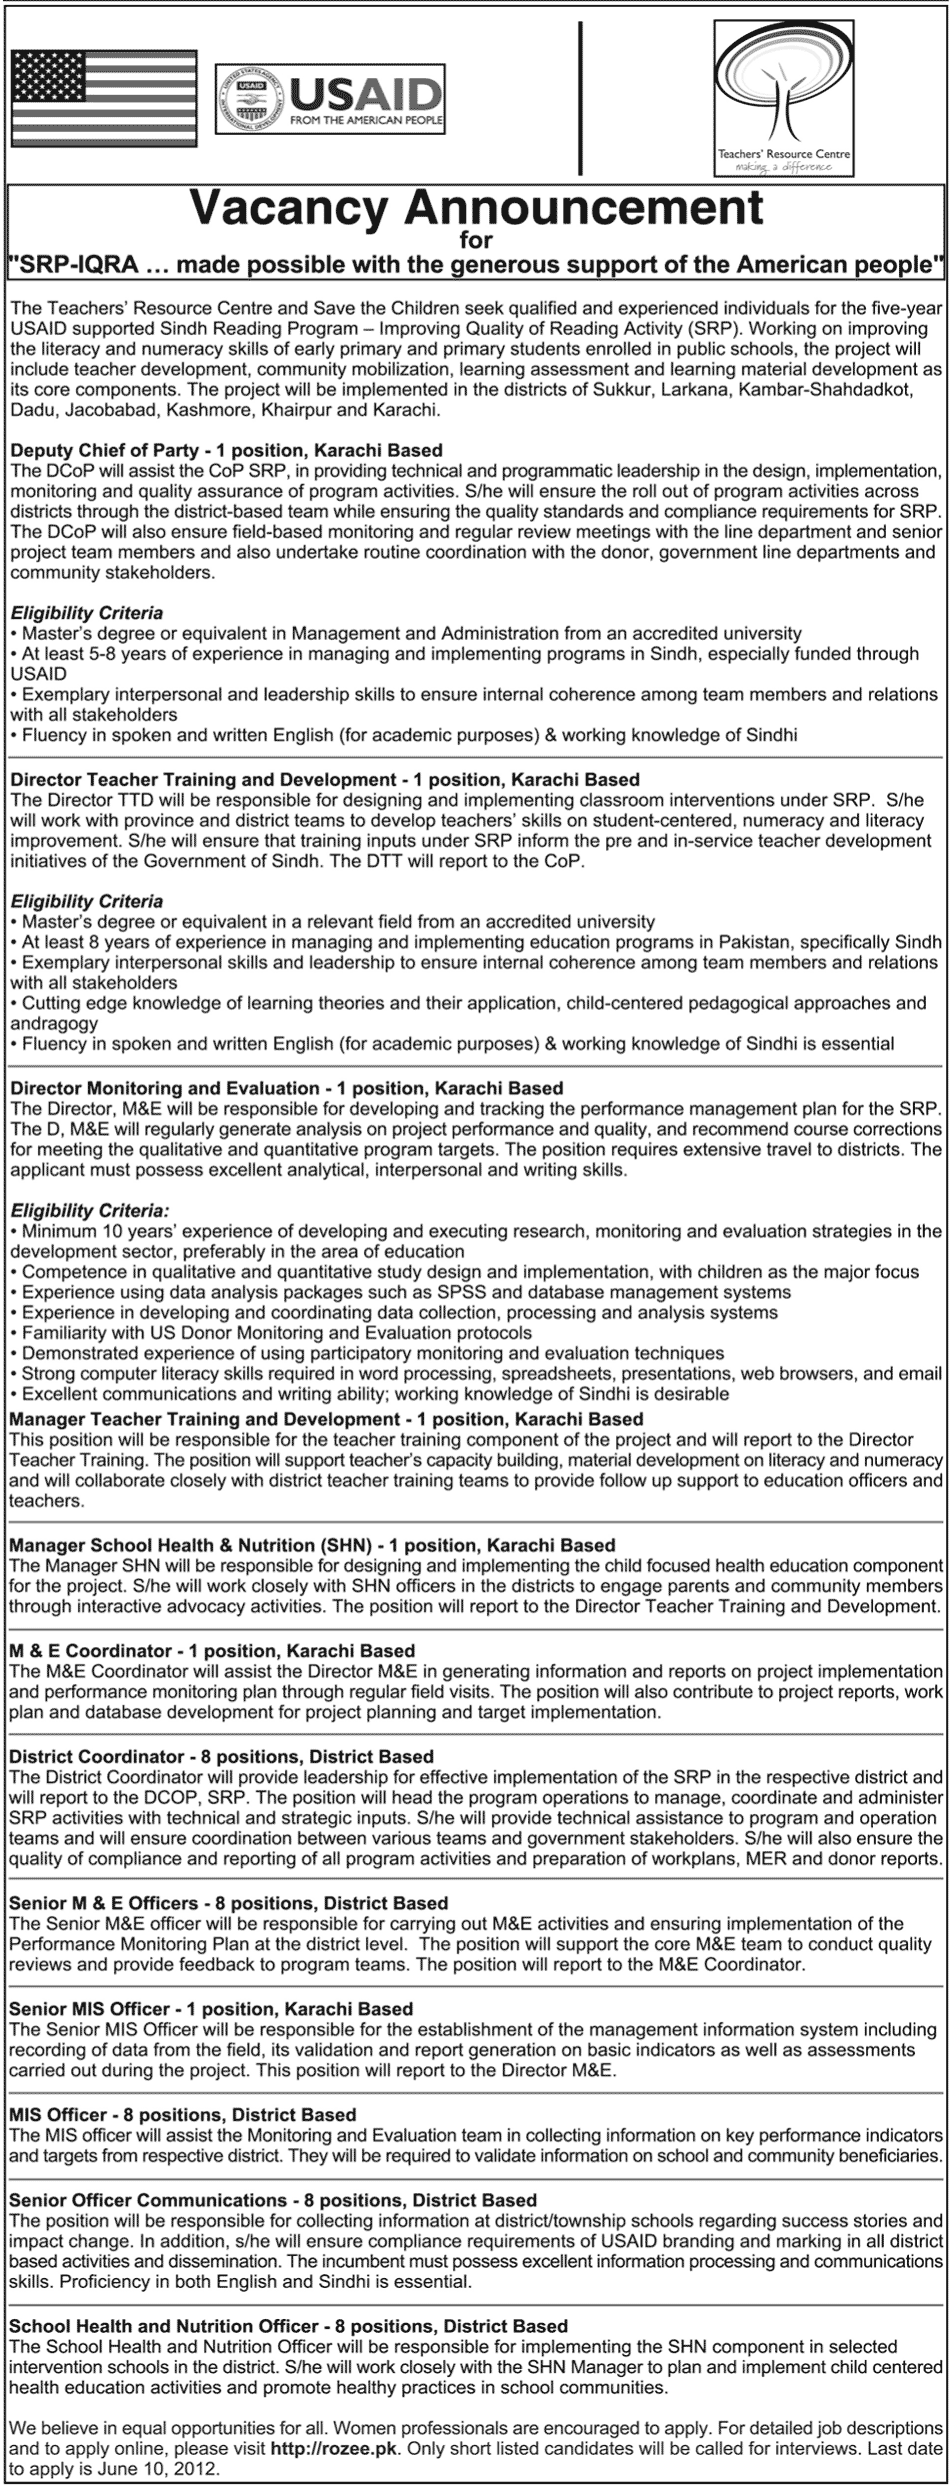 Jobs at SRP-IQRA by USAID (UN. jobs)